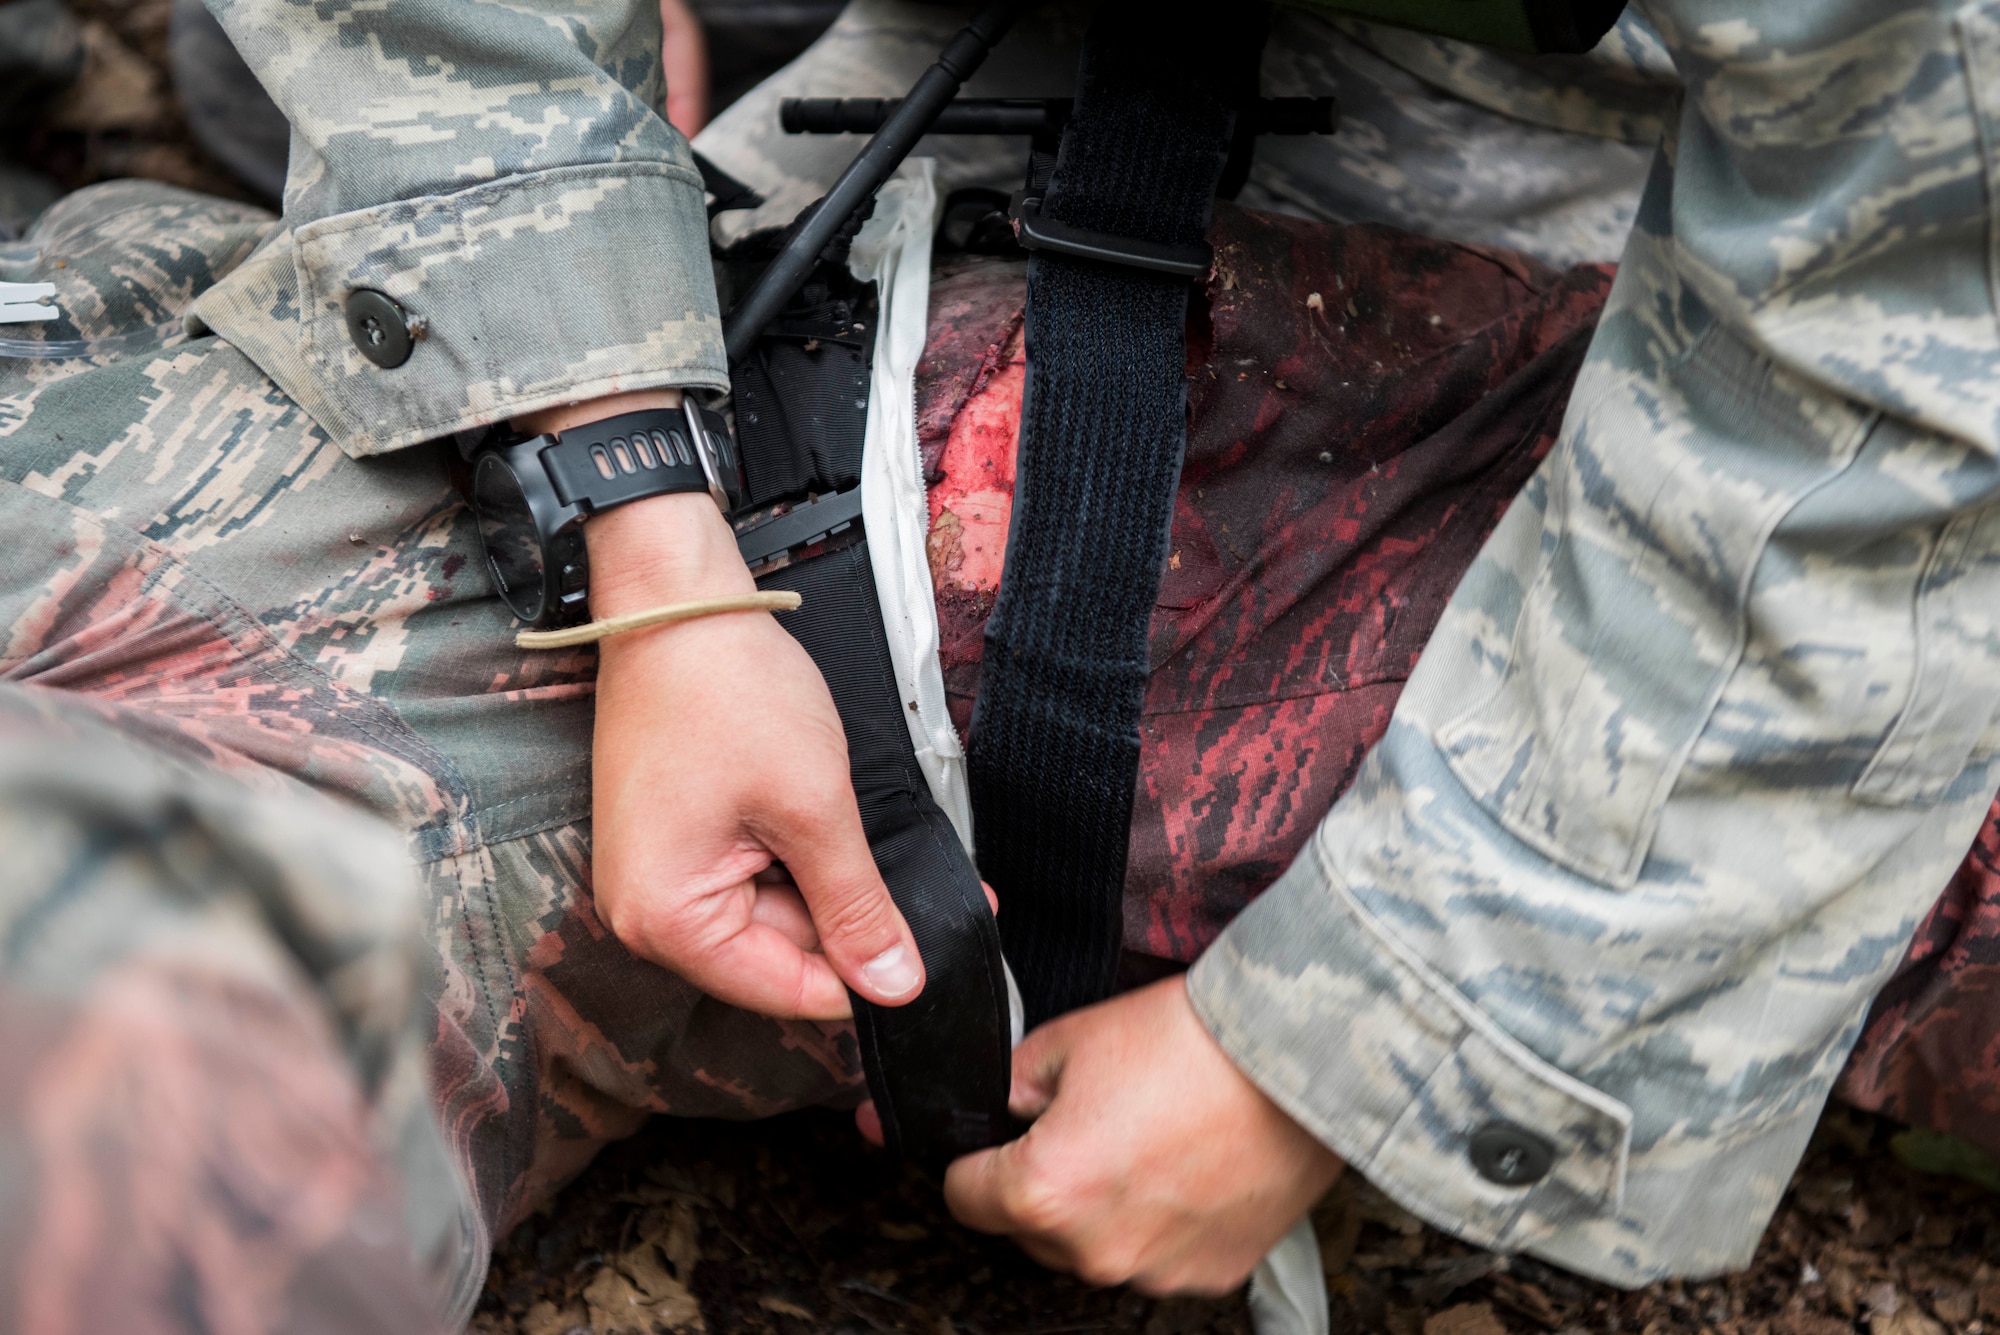 Personnel from the 673d Medical Group apply a tourniquet to an injured “patient” during the practical application of the Tactical Combat Casualty Care course at the Warrior Extreme Paintball course at Joint Base Elmendorf-Richardson, Alaska, July 13, 2018. The course is an opportunity for every student to provide care under fire, perform tactical field care on those who are injured and execute a tactical evacuation.